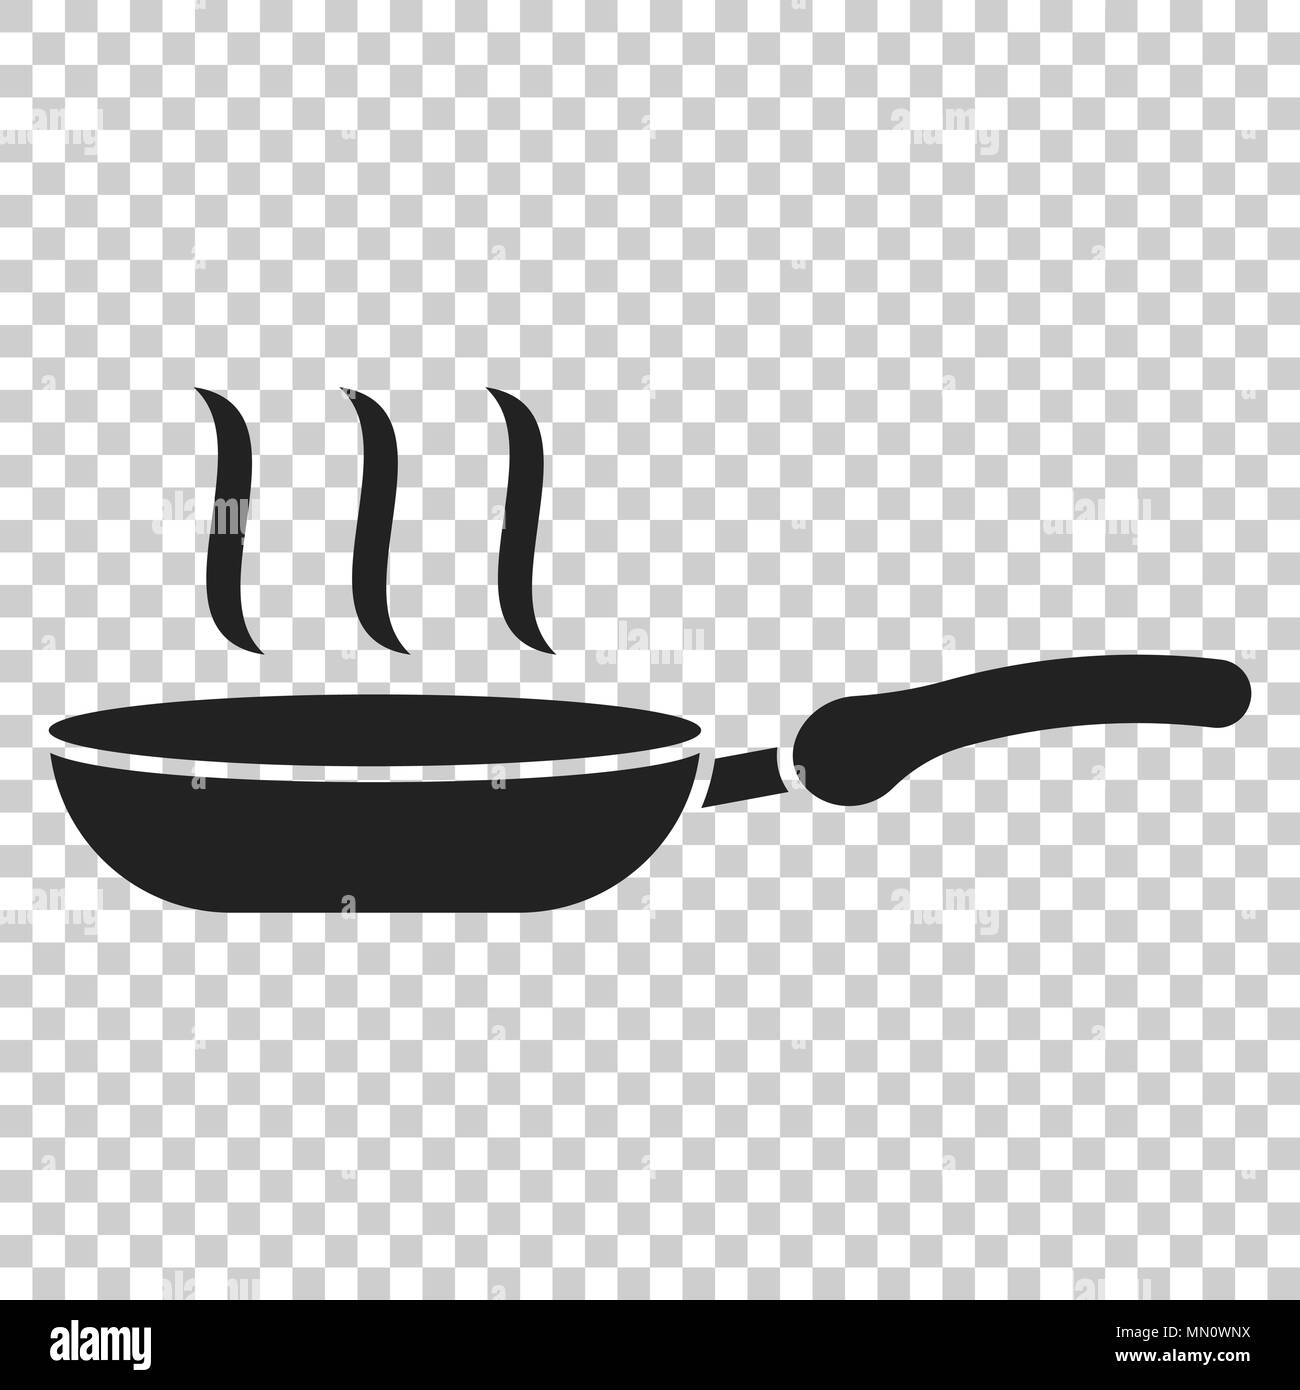 Frying Pan Icon In Flat Style Cooking Pan Illustration On Isolated Transparent Background Skillet Kitchen Equipment Business Concept Stock Vector Image Art Alamy